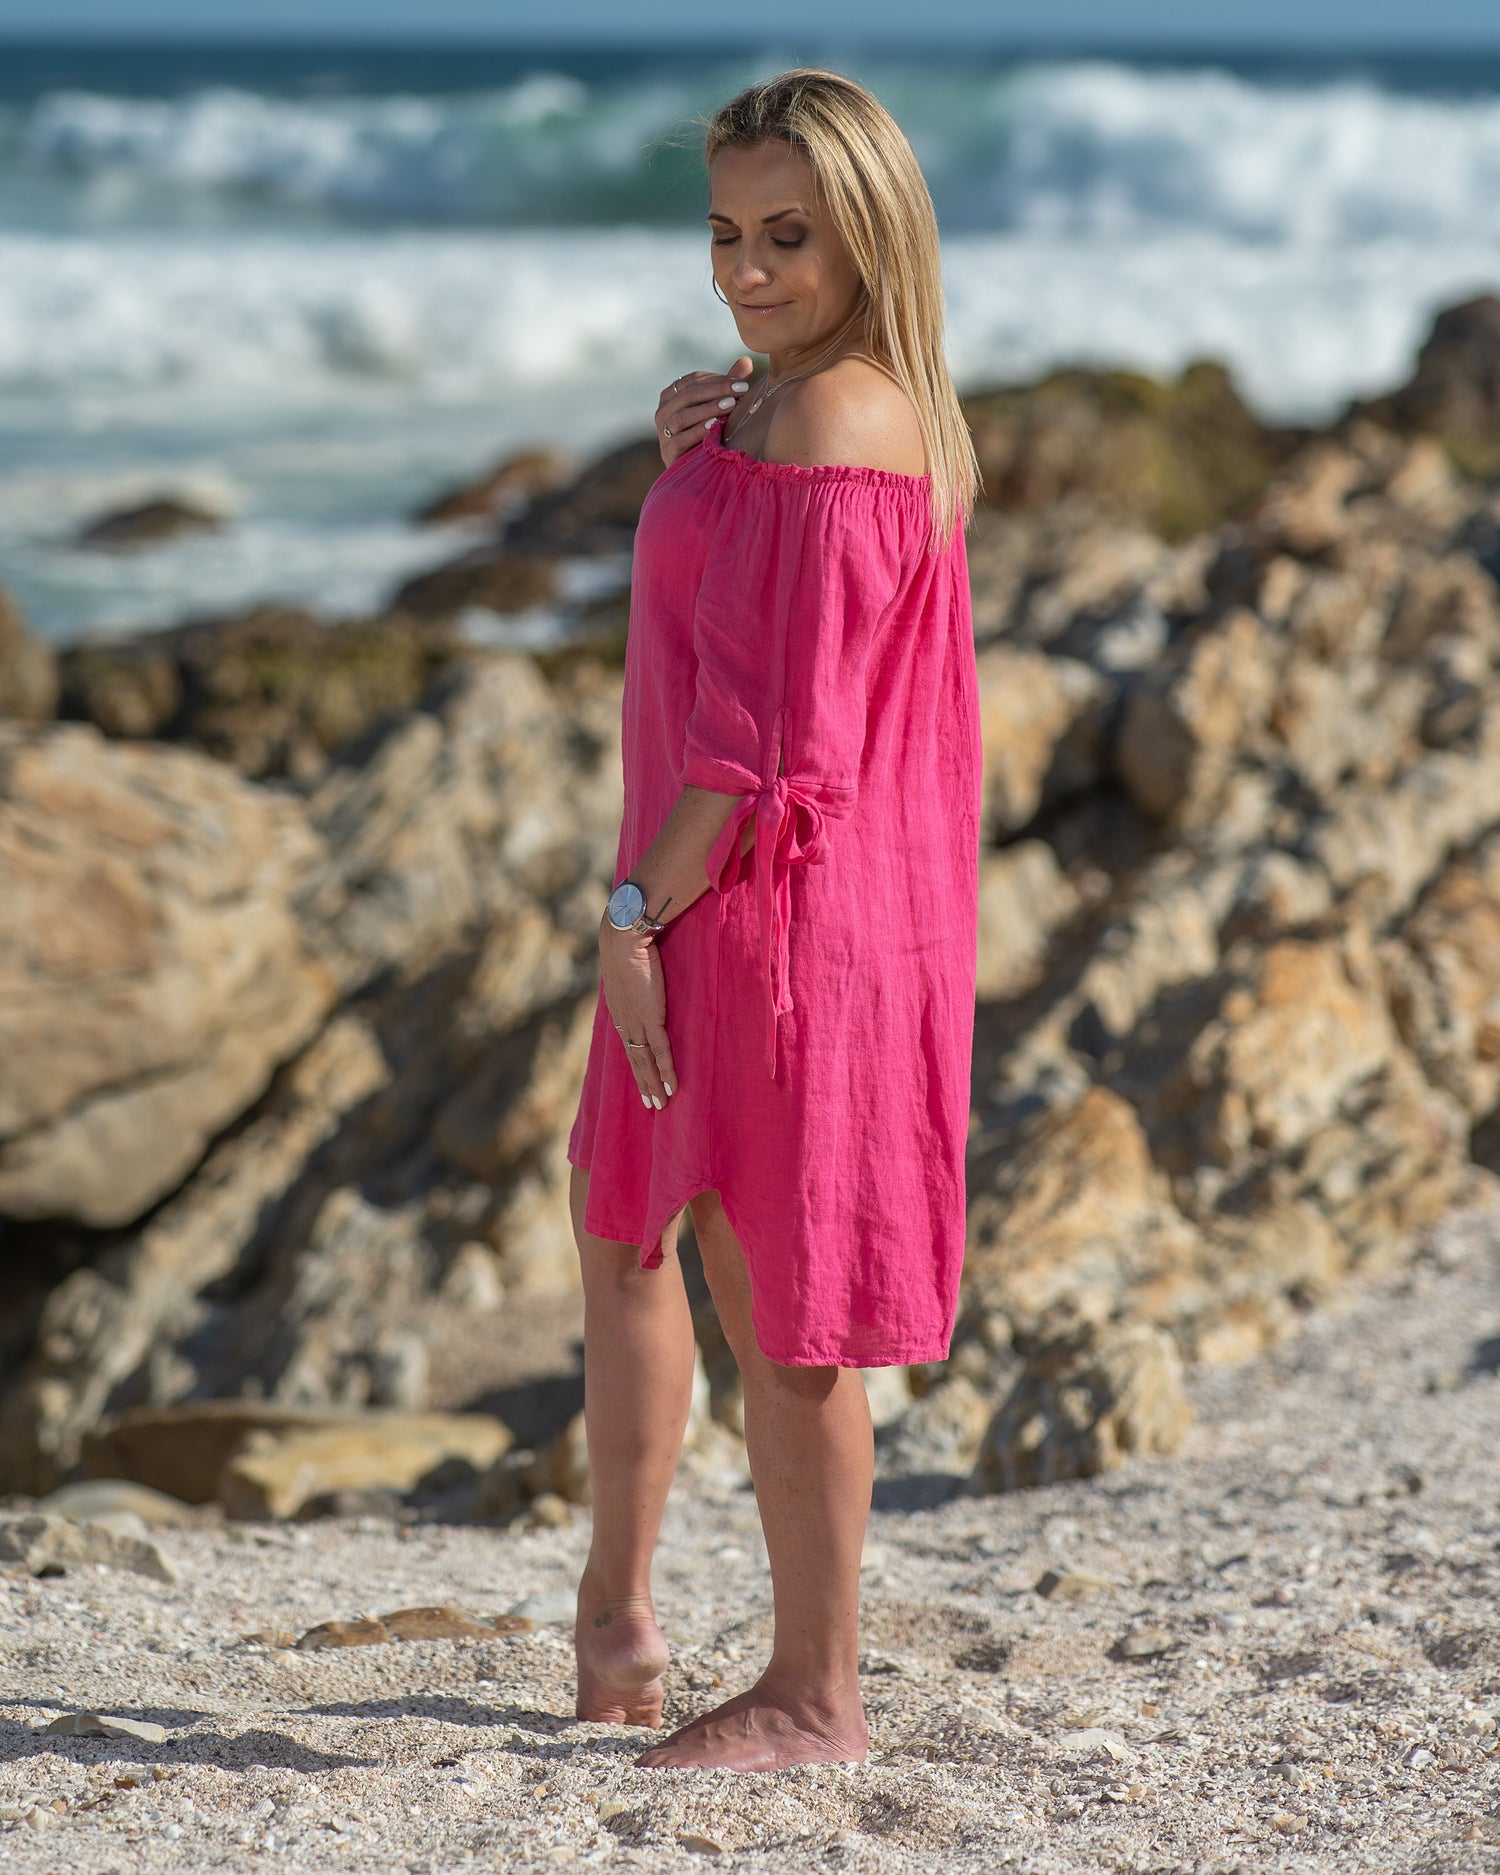 The elasticated neckline offers a flattering and secure fit, allowing you to showcase your shoulders and collarbone with effortless grace. What sets this dress apart are the charming drawstrings on the arms. The mini length adds a playful vibe to the dress, making it ideal for casual outings, beach strolls, or weekend brunches